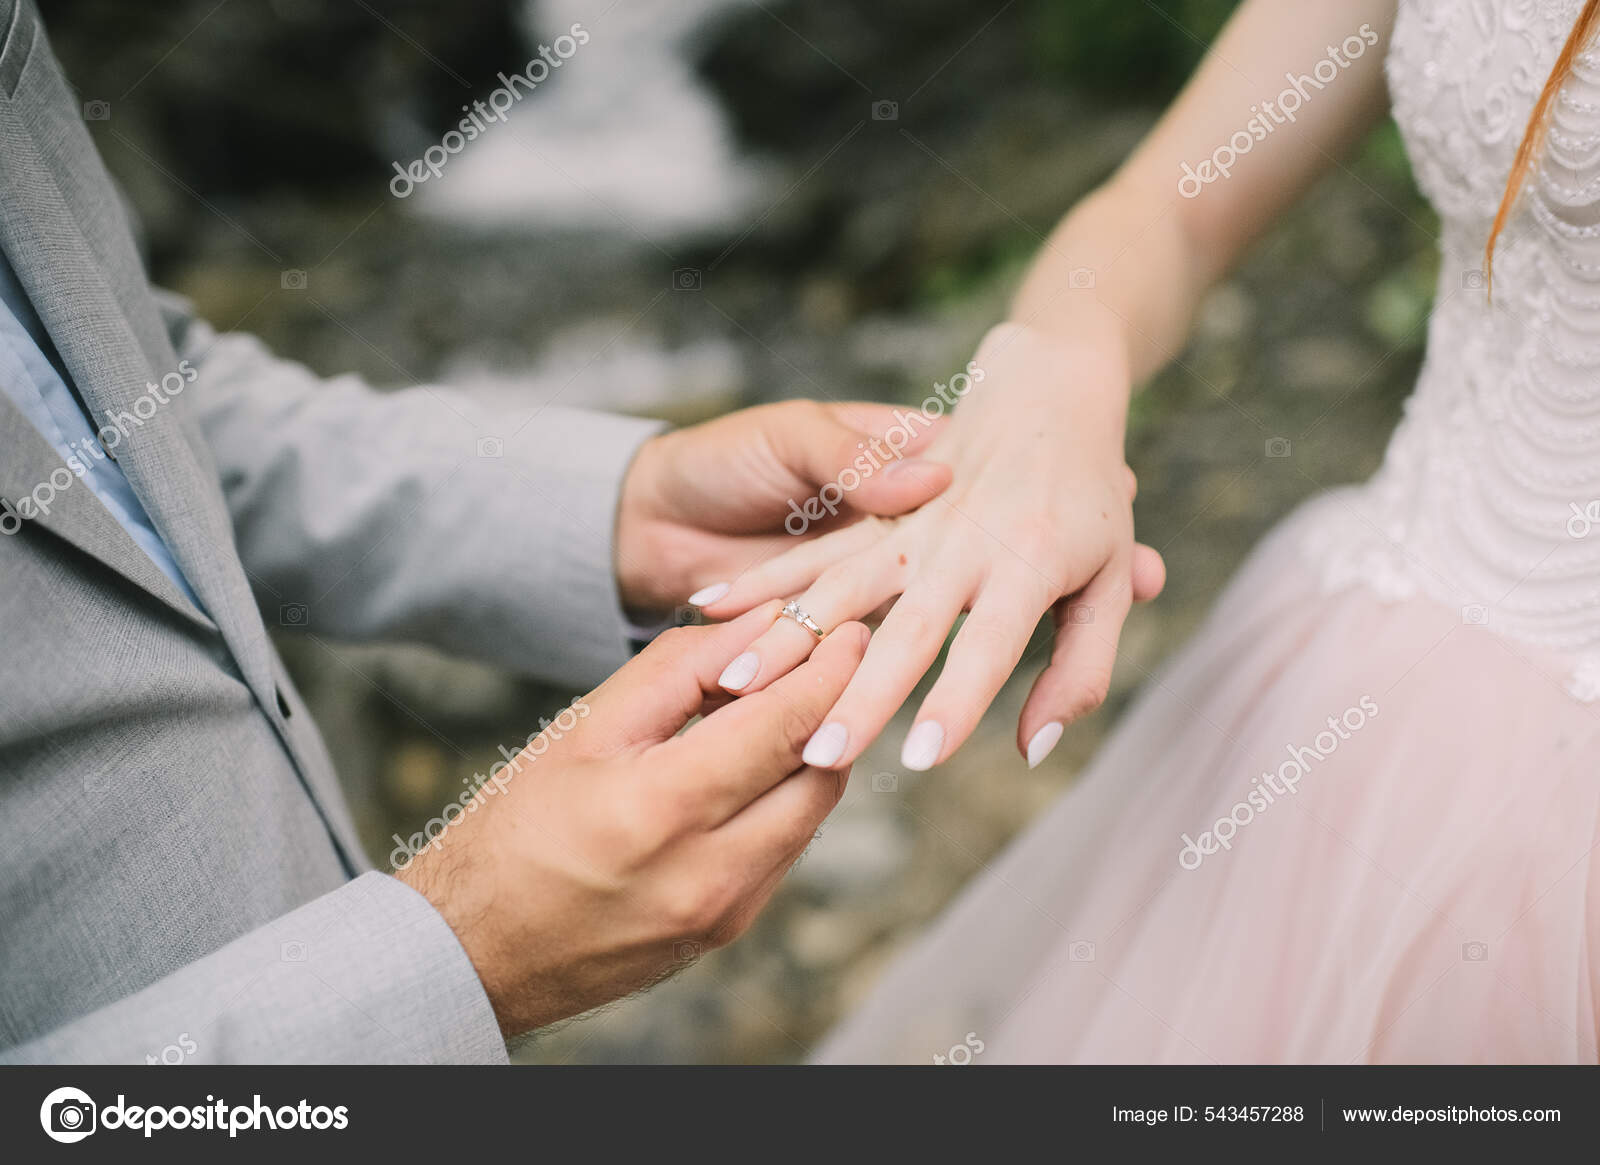 Premium Photo | The newlyweds exchange rings, near the wedding arch, at the  wedding ceremony. marriage. soft focus